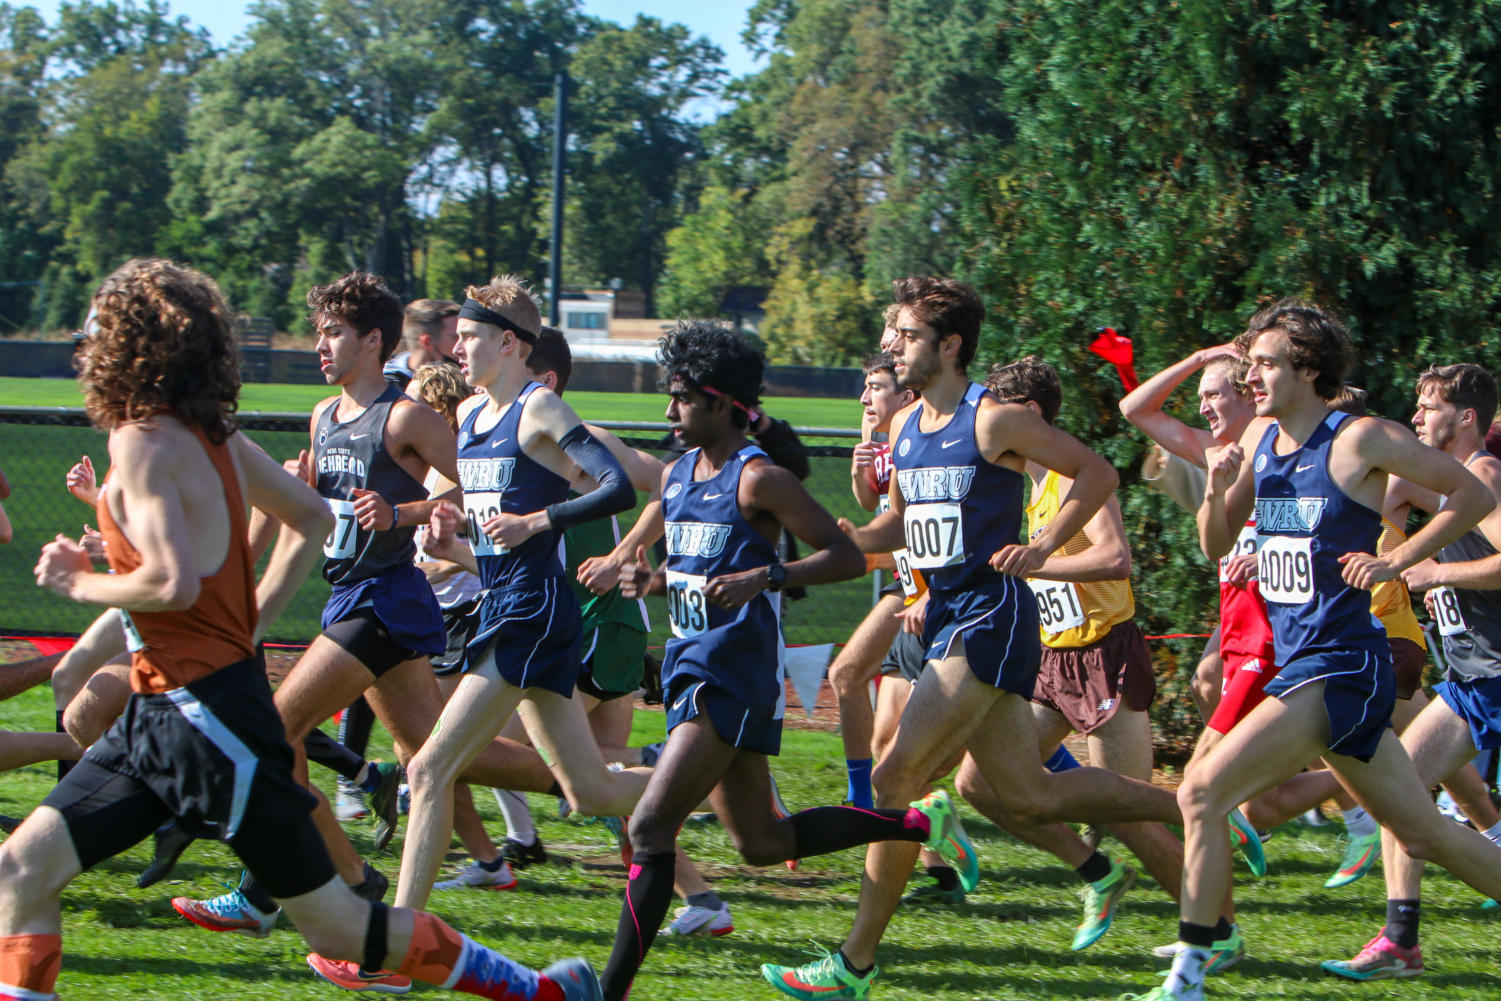 Spartan team earn mixed results over Fall Break weekend The Observer